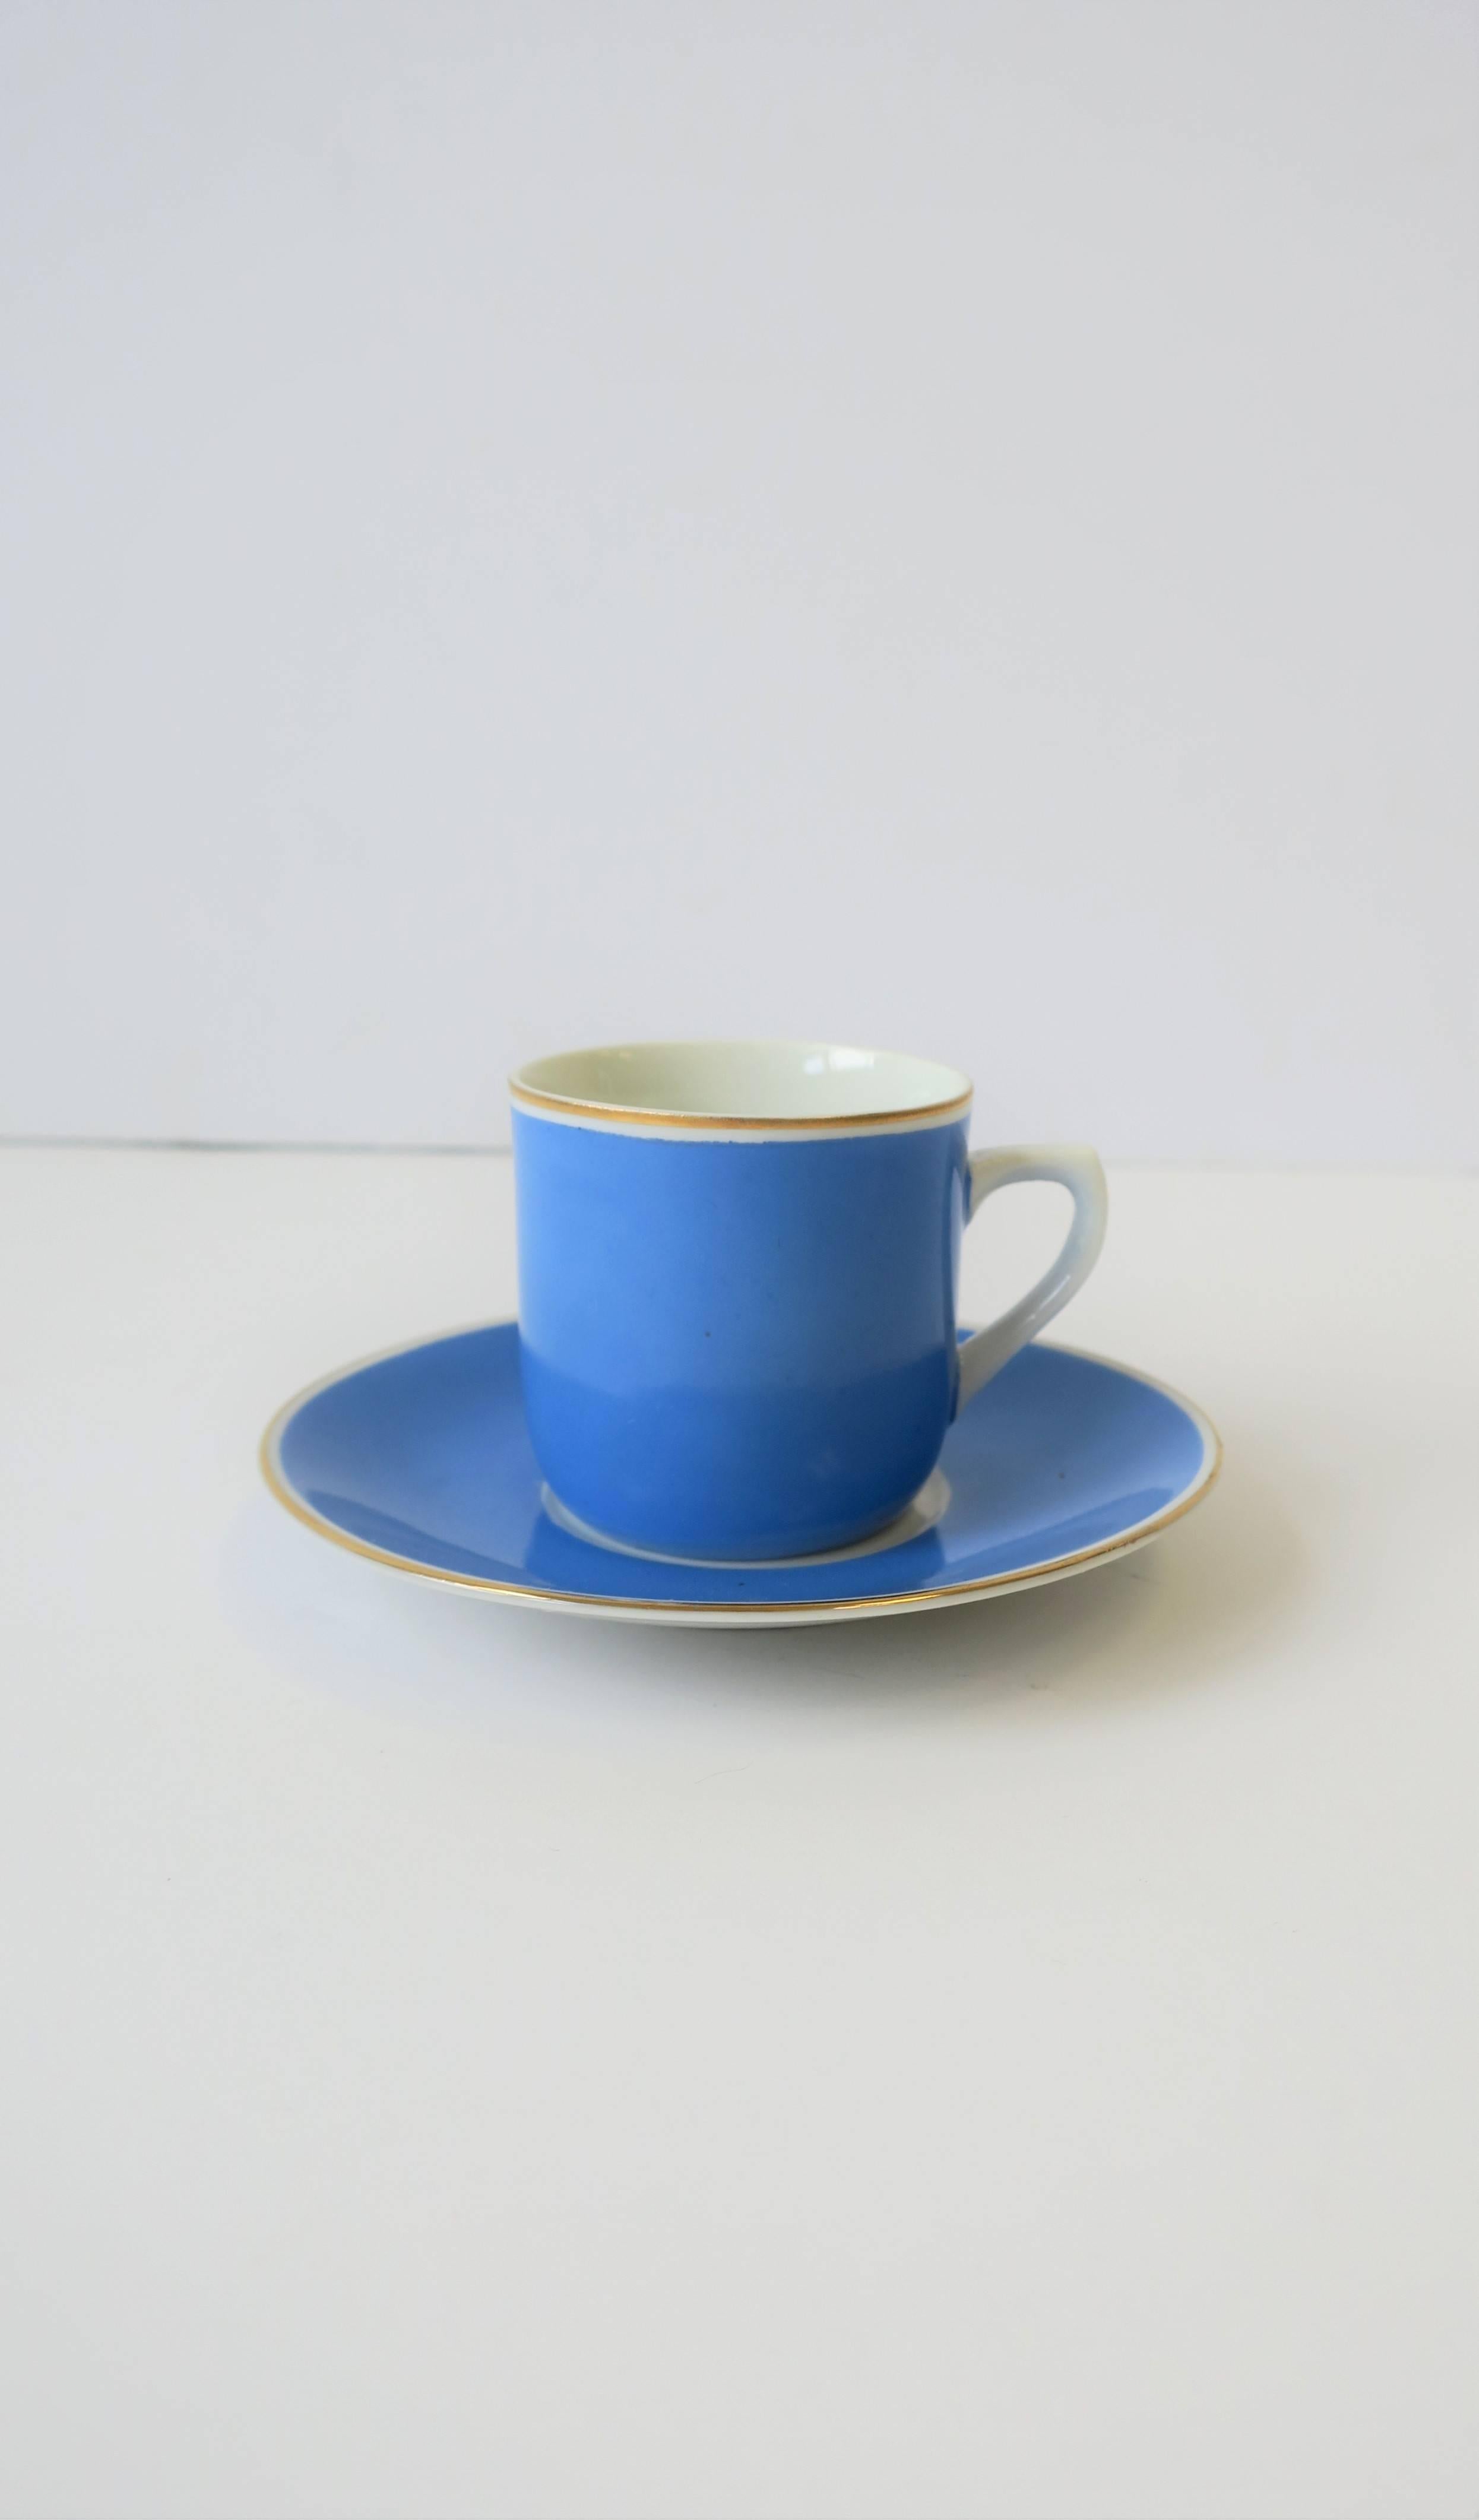 A beautiful midcentury German porcelain blue and white espresso coffee demitasse cup and saucer, circa mid-1940s Germany. Cup and saucer have a beautiful thin gold detail around edge. Pieces are marked Bavaria, Germany, US Zone, as show in image #6. 